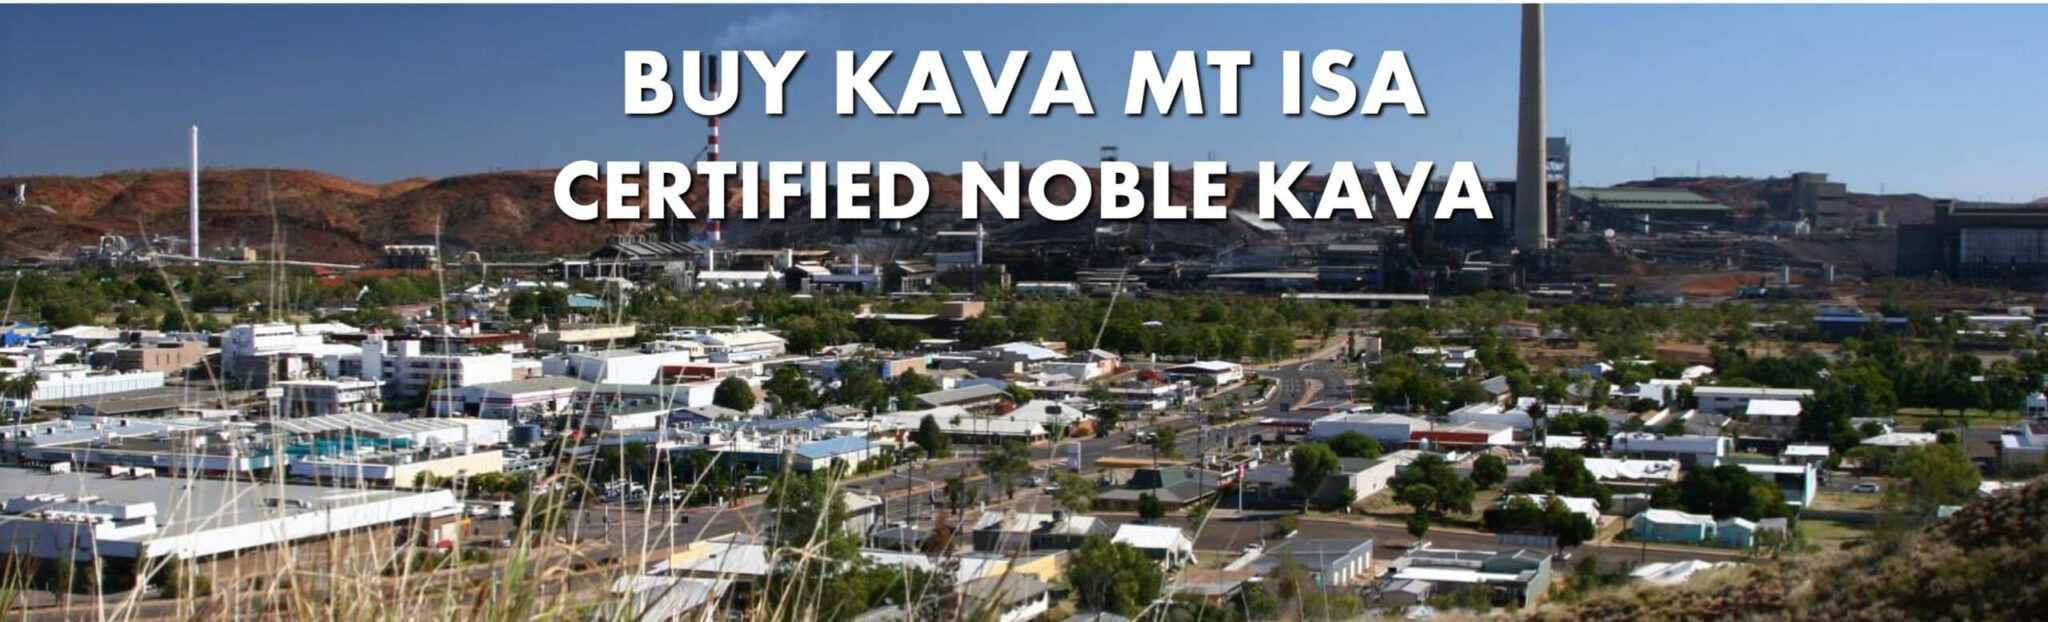 Aerial view of Mt Isa Queensland with caption Buy Kava Mt Isa Certified Noble Kava